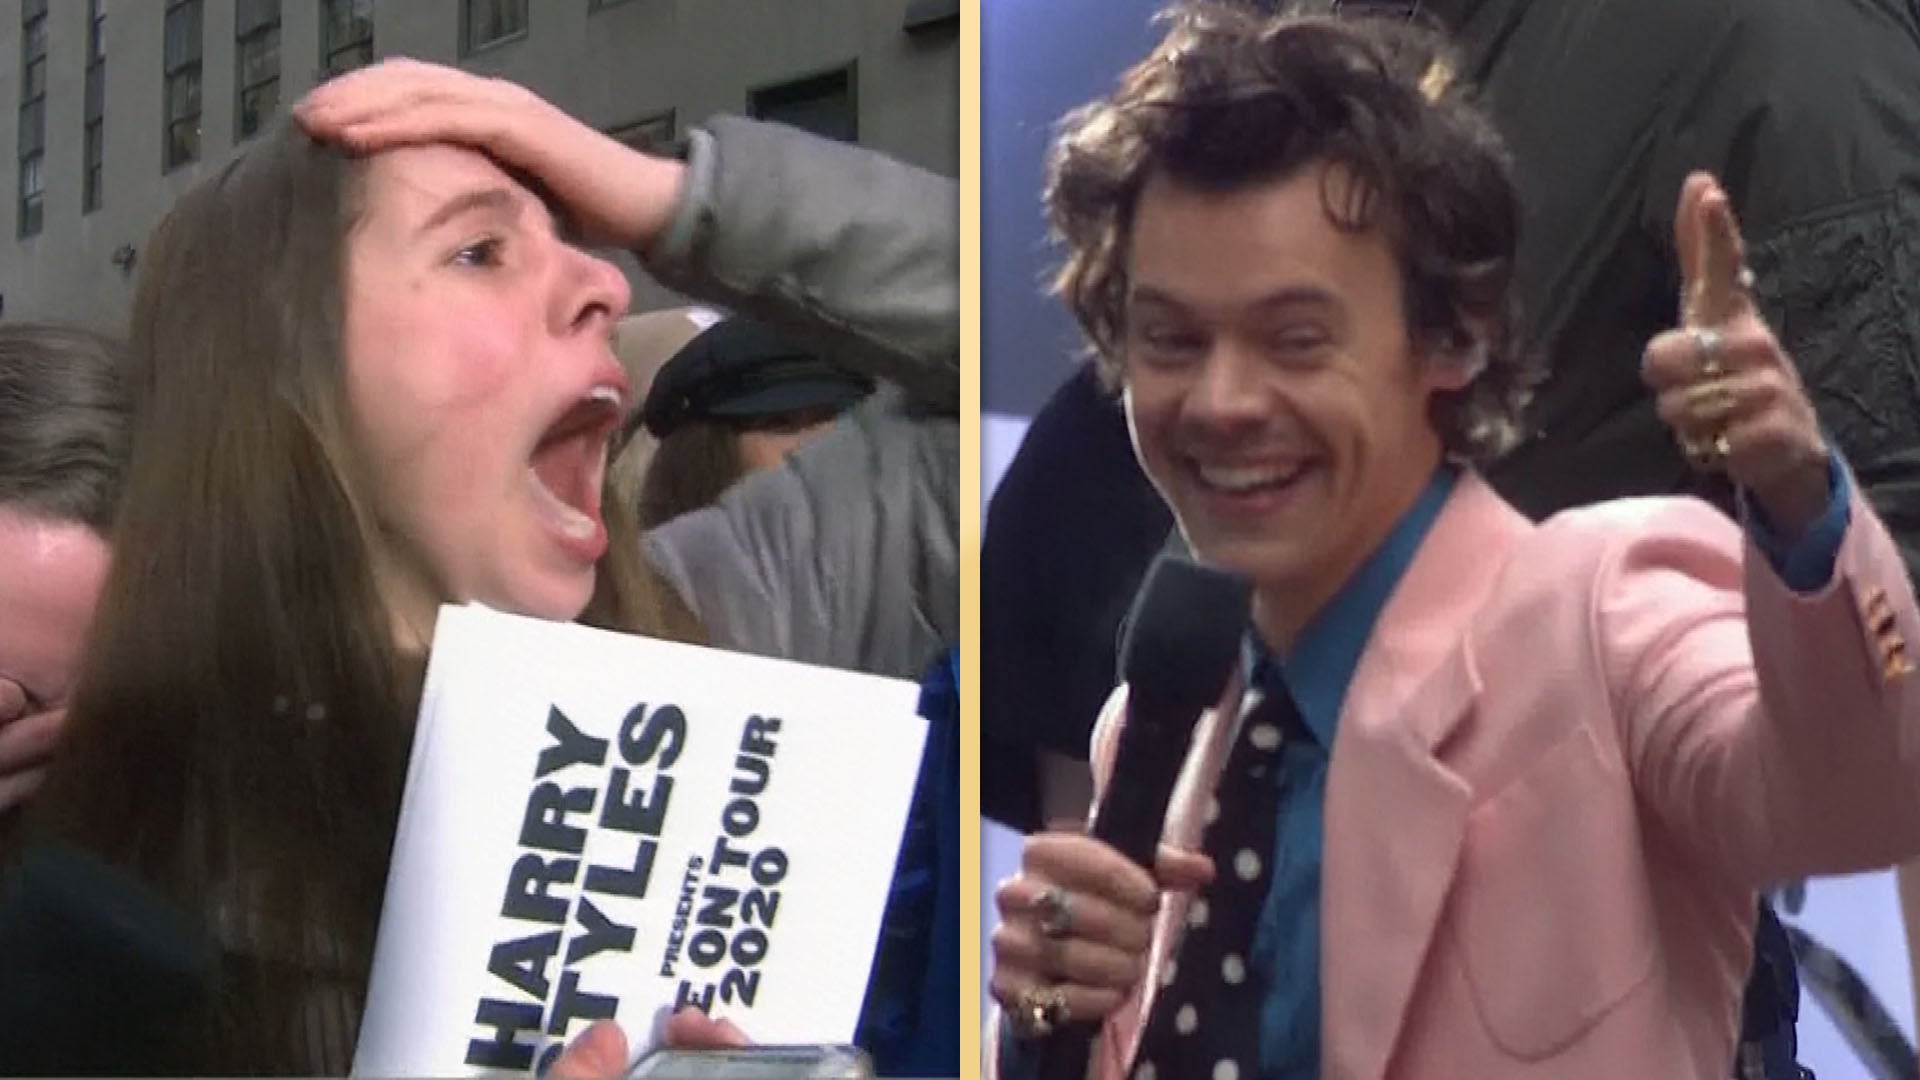 Harry Styles's New Short Hair Has Fans Screaming